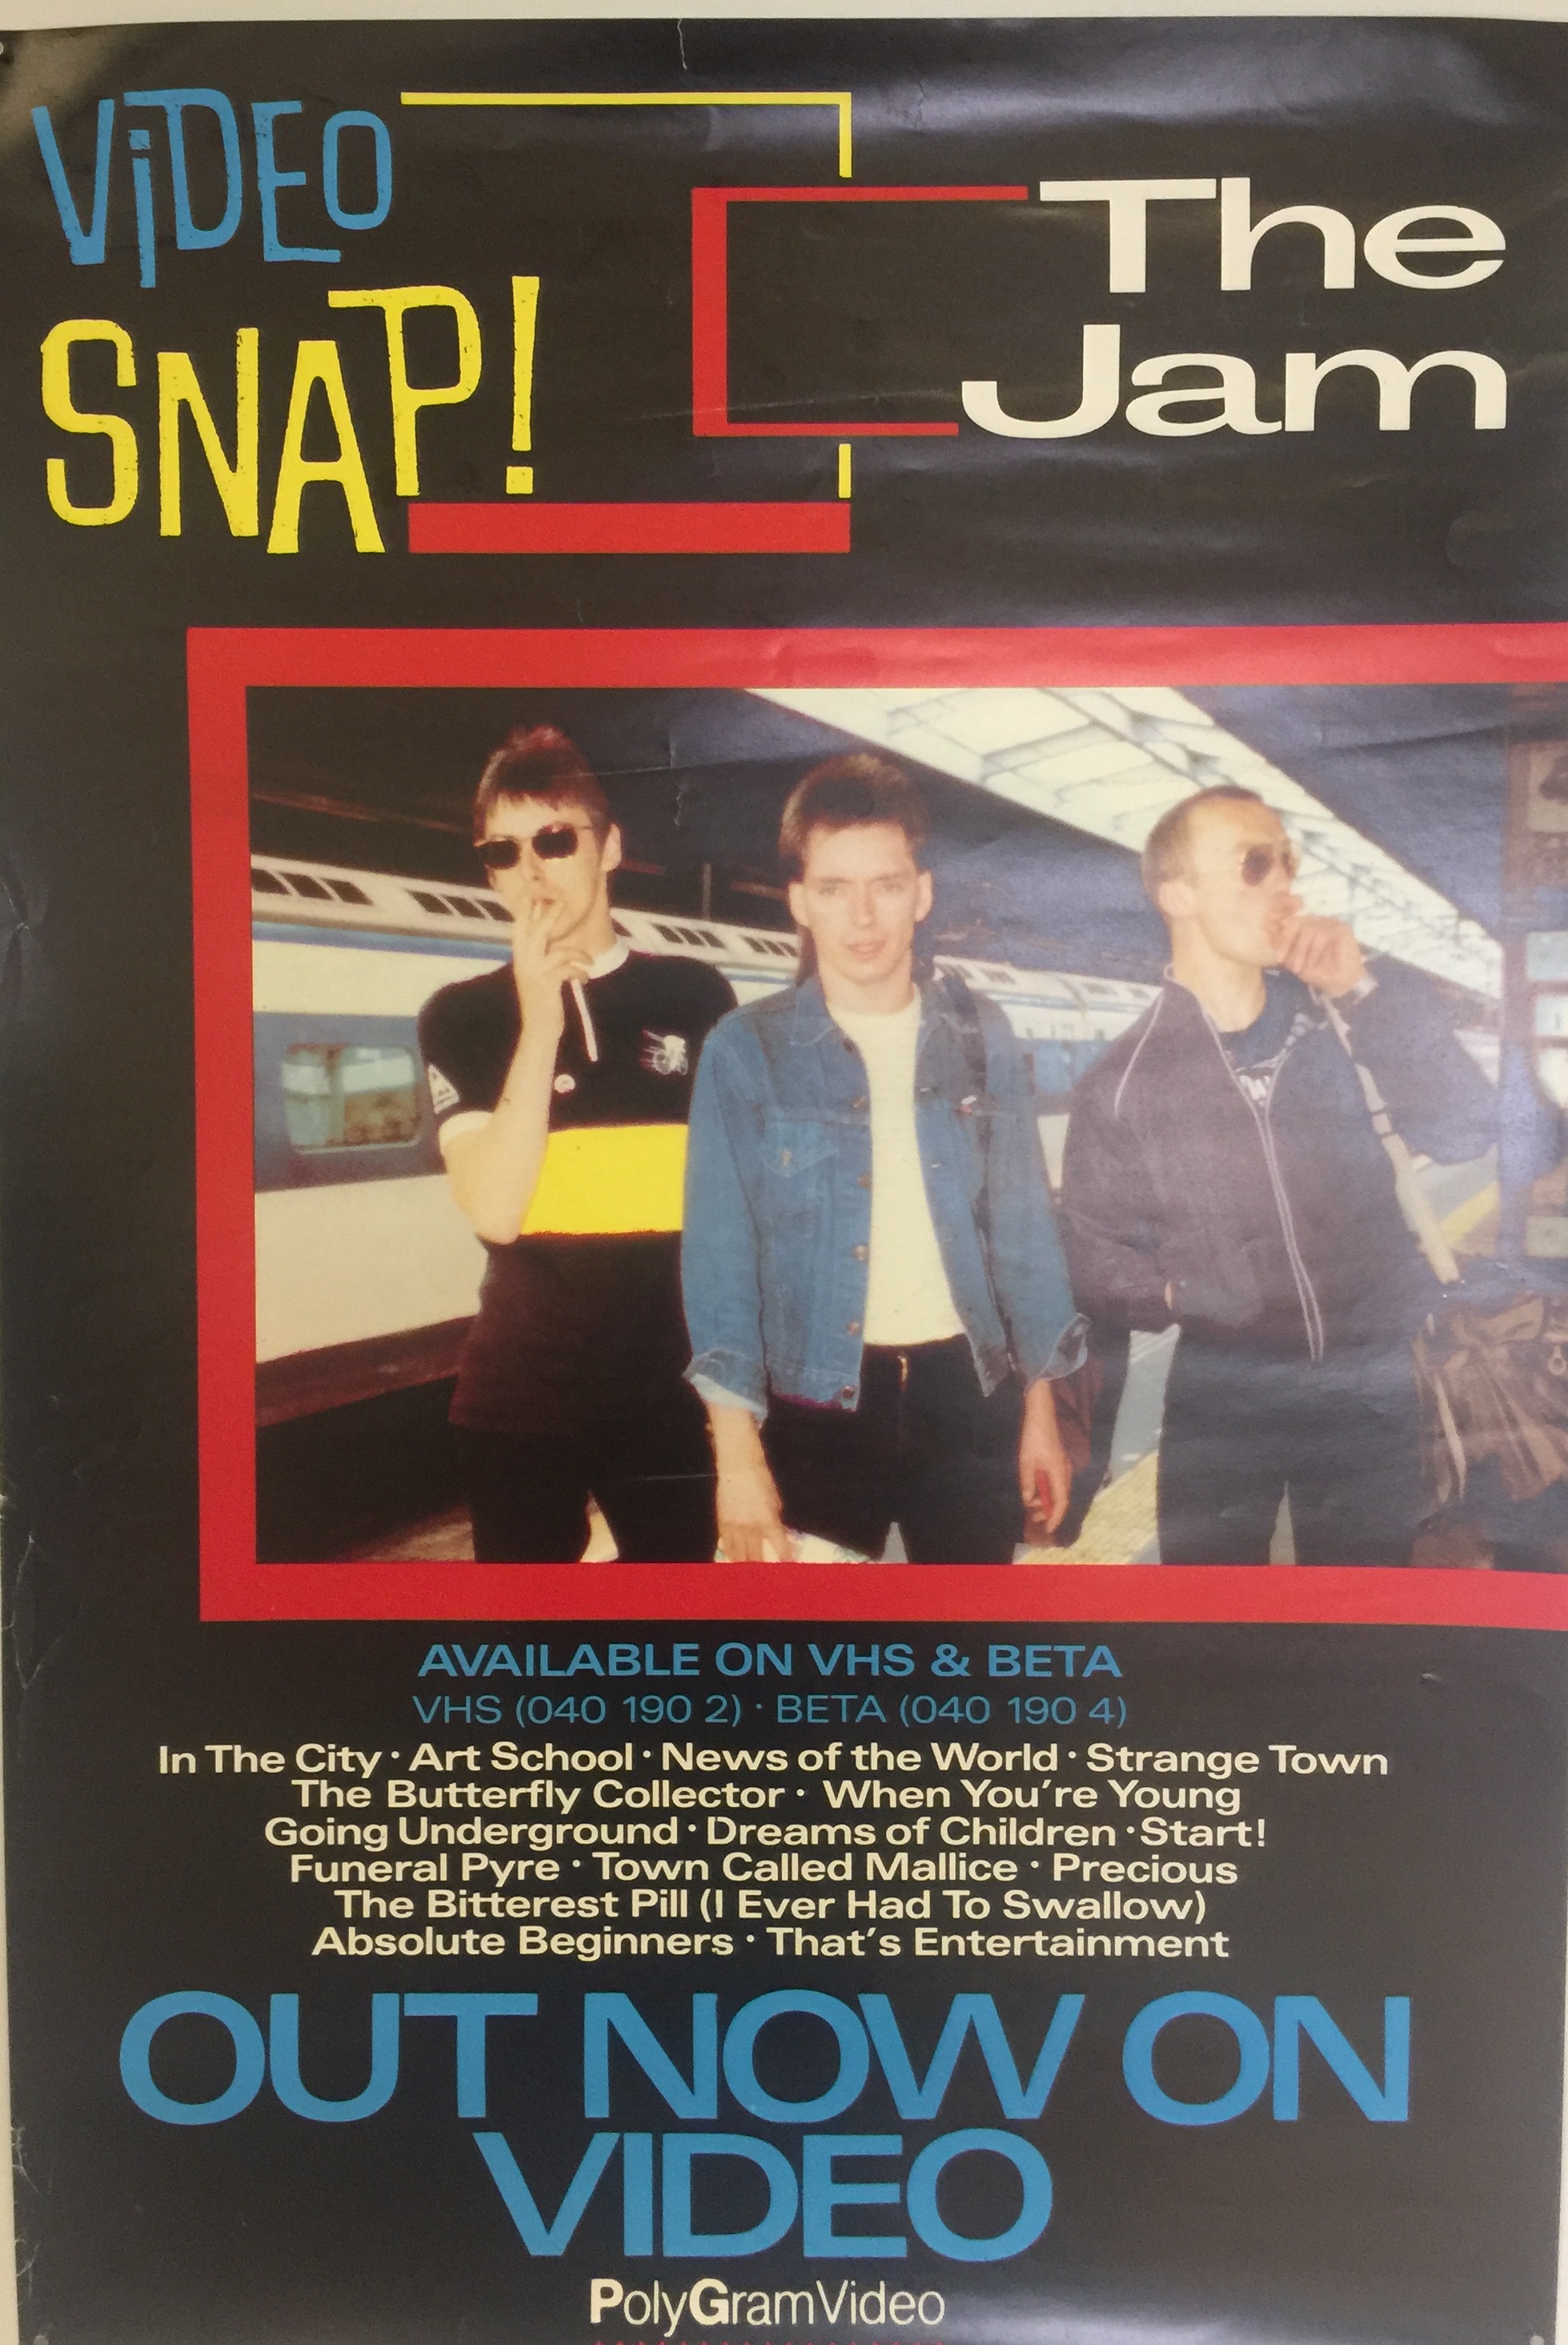 THE JAM VIDEO SNAP POSTER. An original poster for the VHS release of 'Video Snap'. Measures 16.